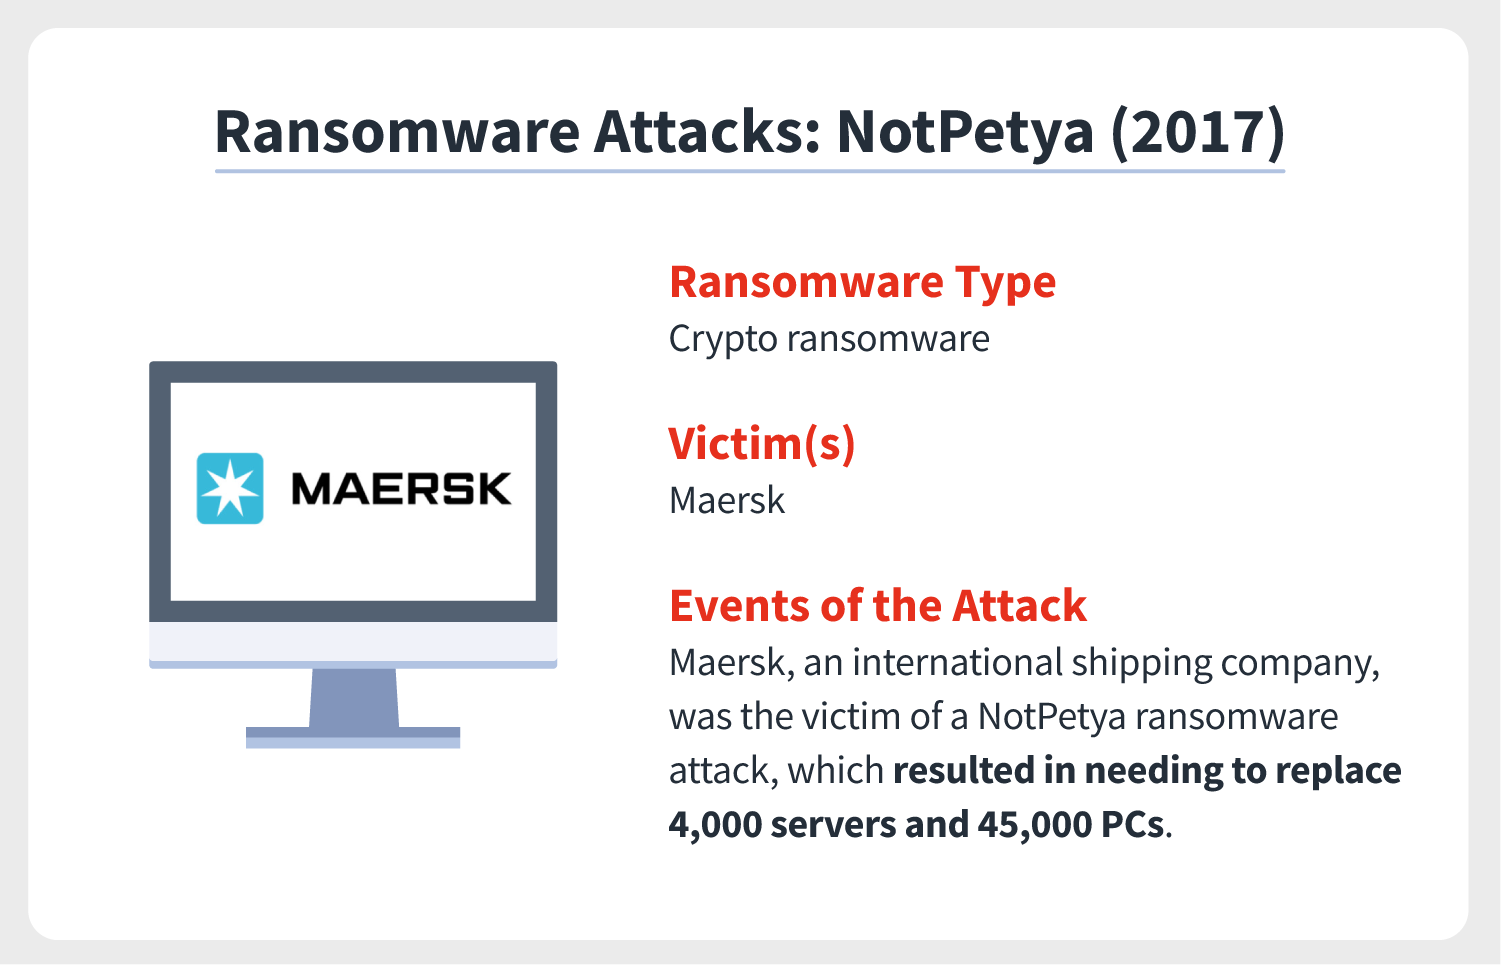 An illustration accompanies information regarding a NotPetya ransomware attack that occurred in 2017.